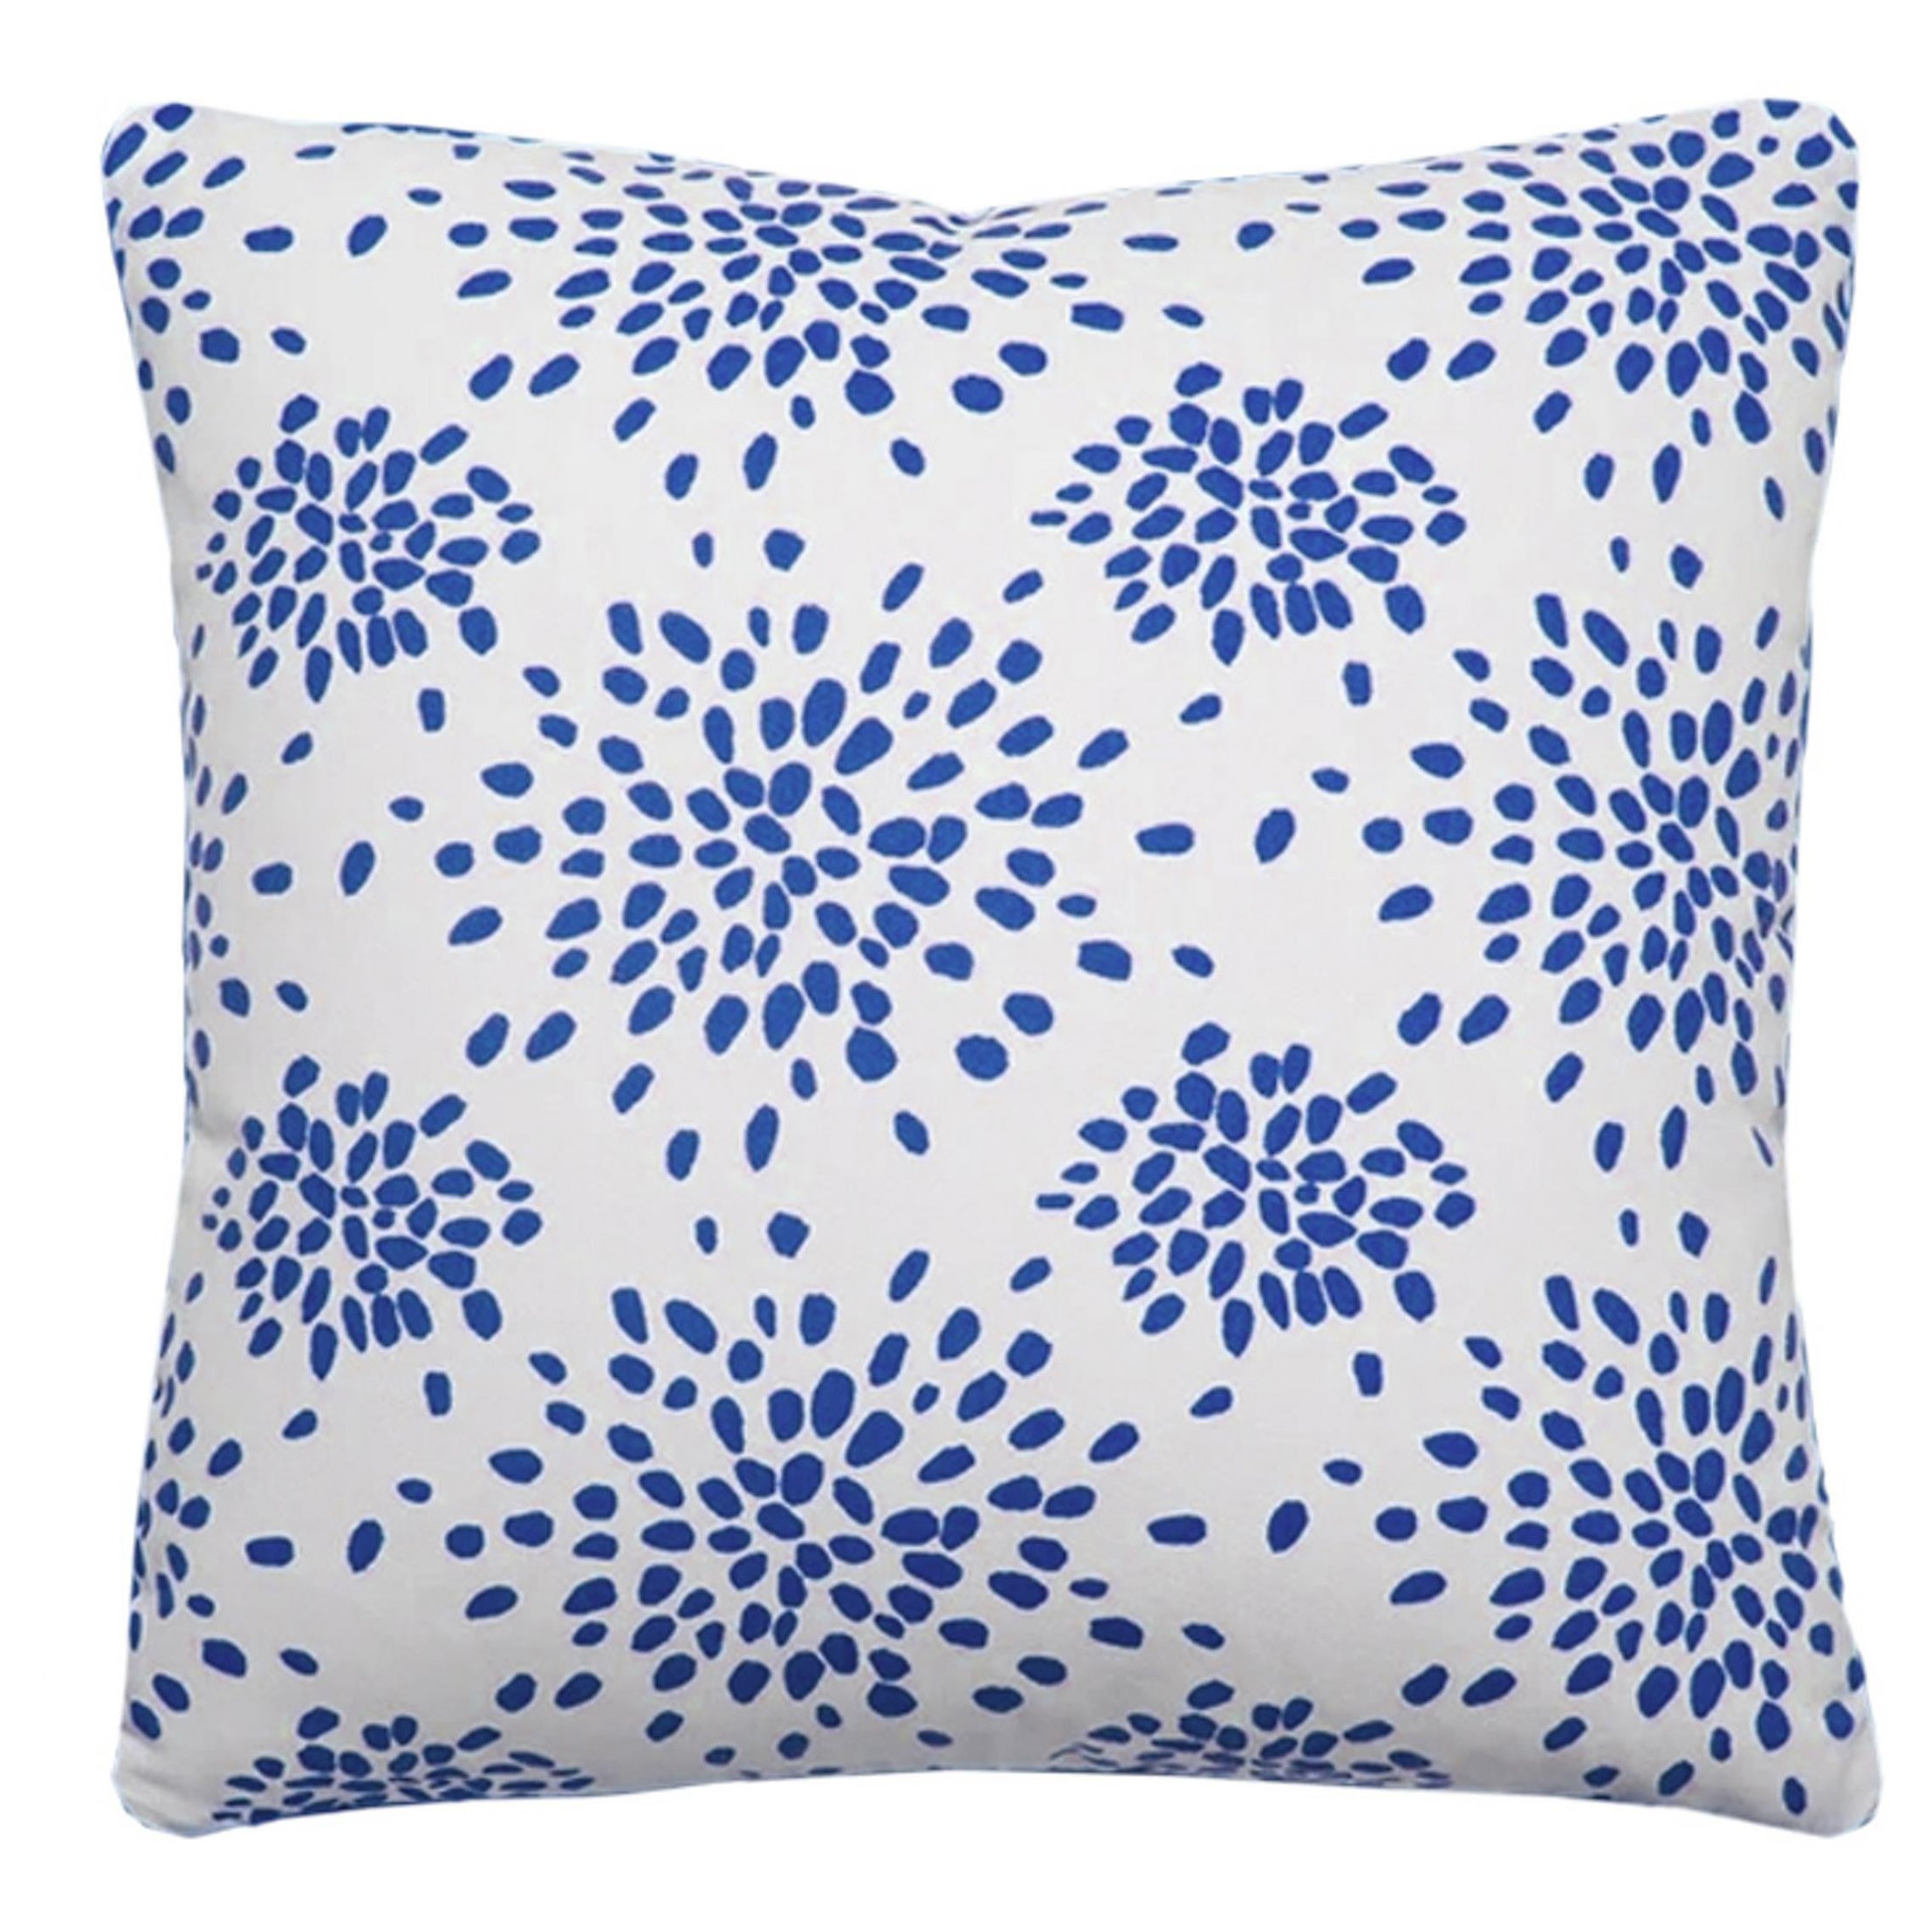 Fireworks Pillow For Sale